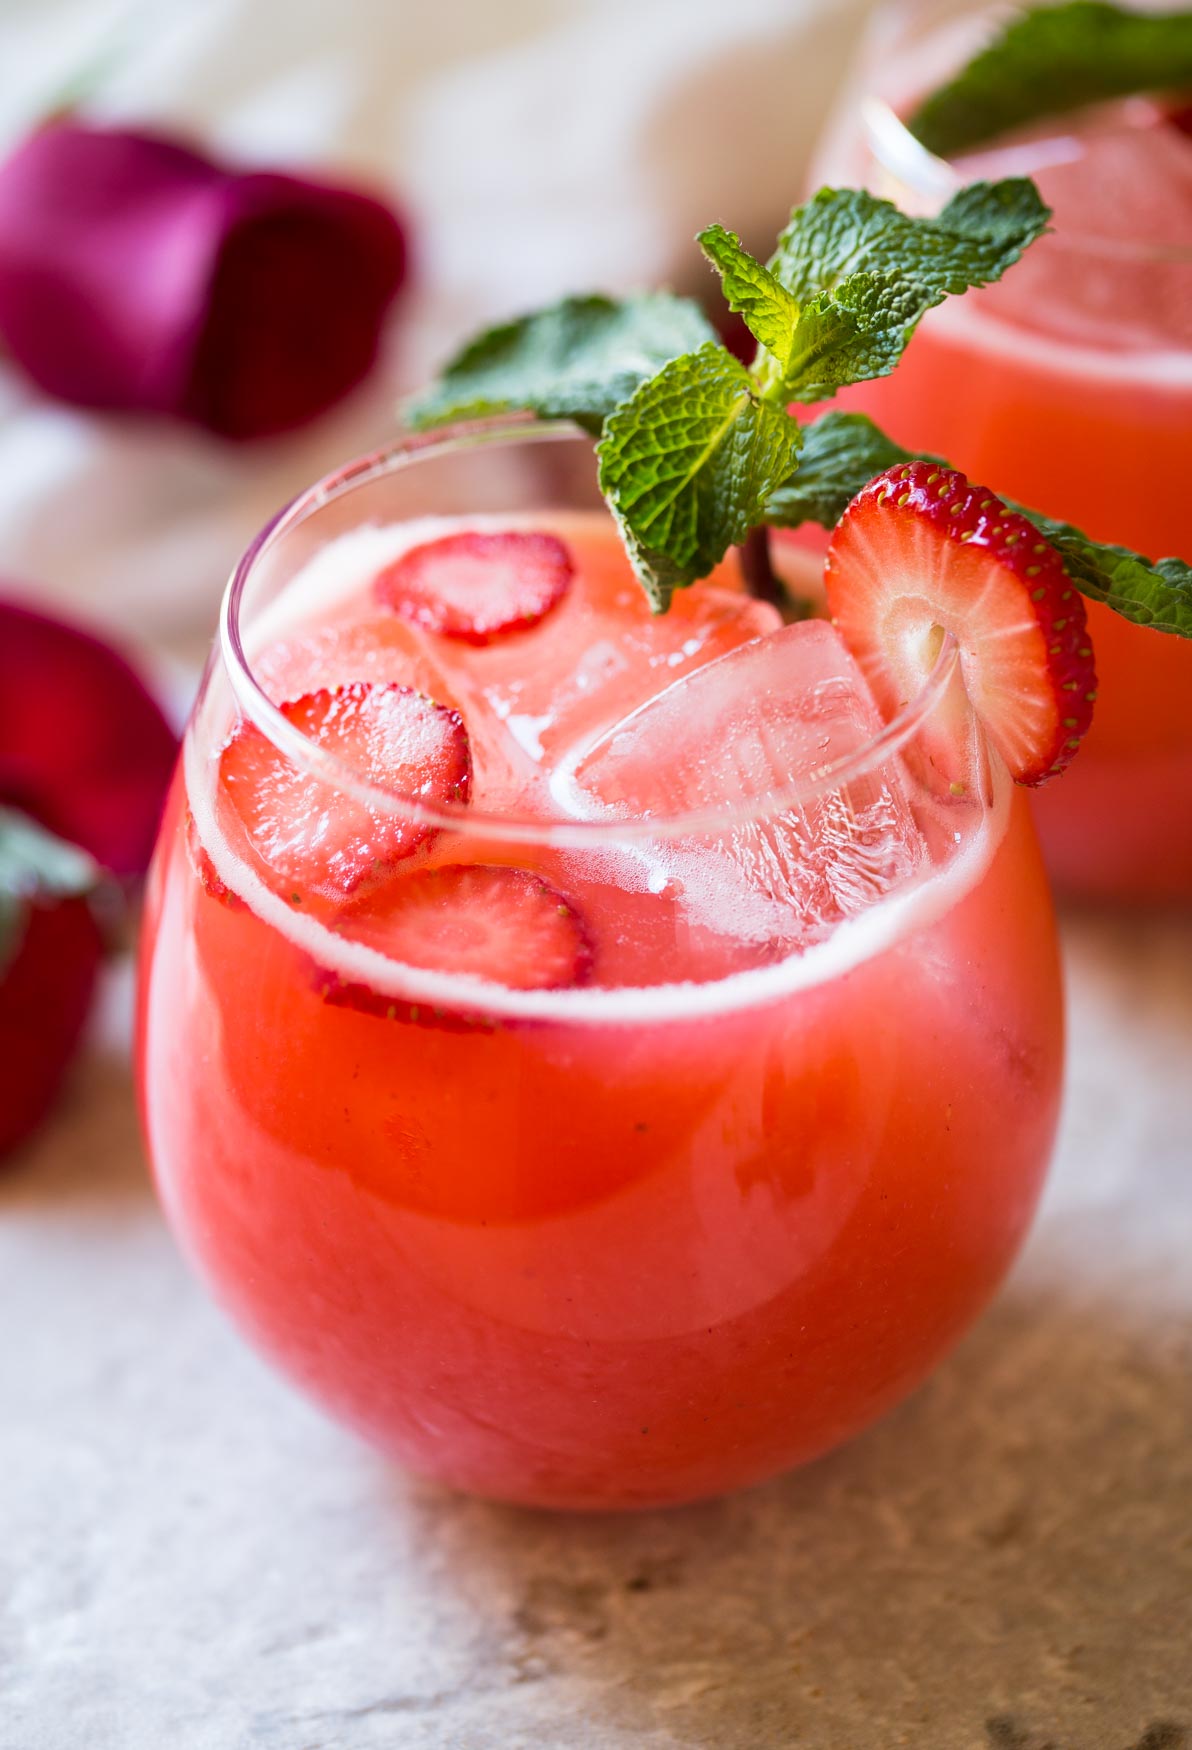 Easy Homemade Fresh Strawberry Lemonade -- healthy, refreshing and cooling drink recipe to enjoy the warm days of spring and summer. | #watchwhatuwat #lemonade #summerdrink